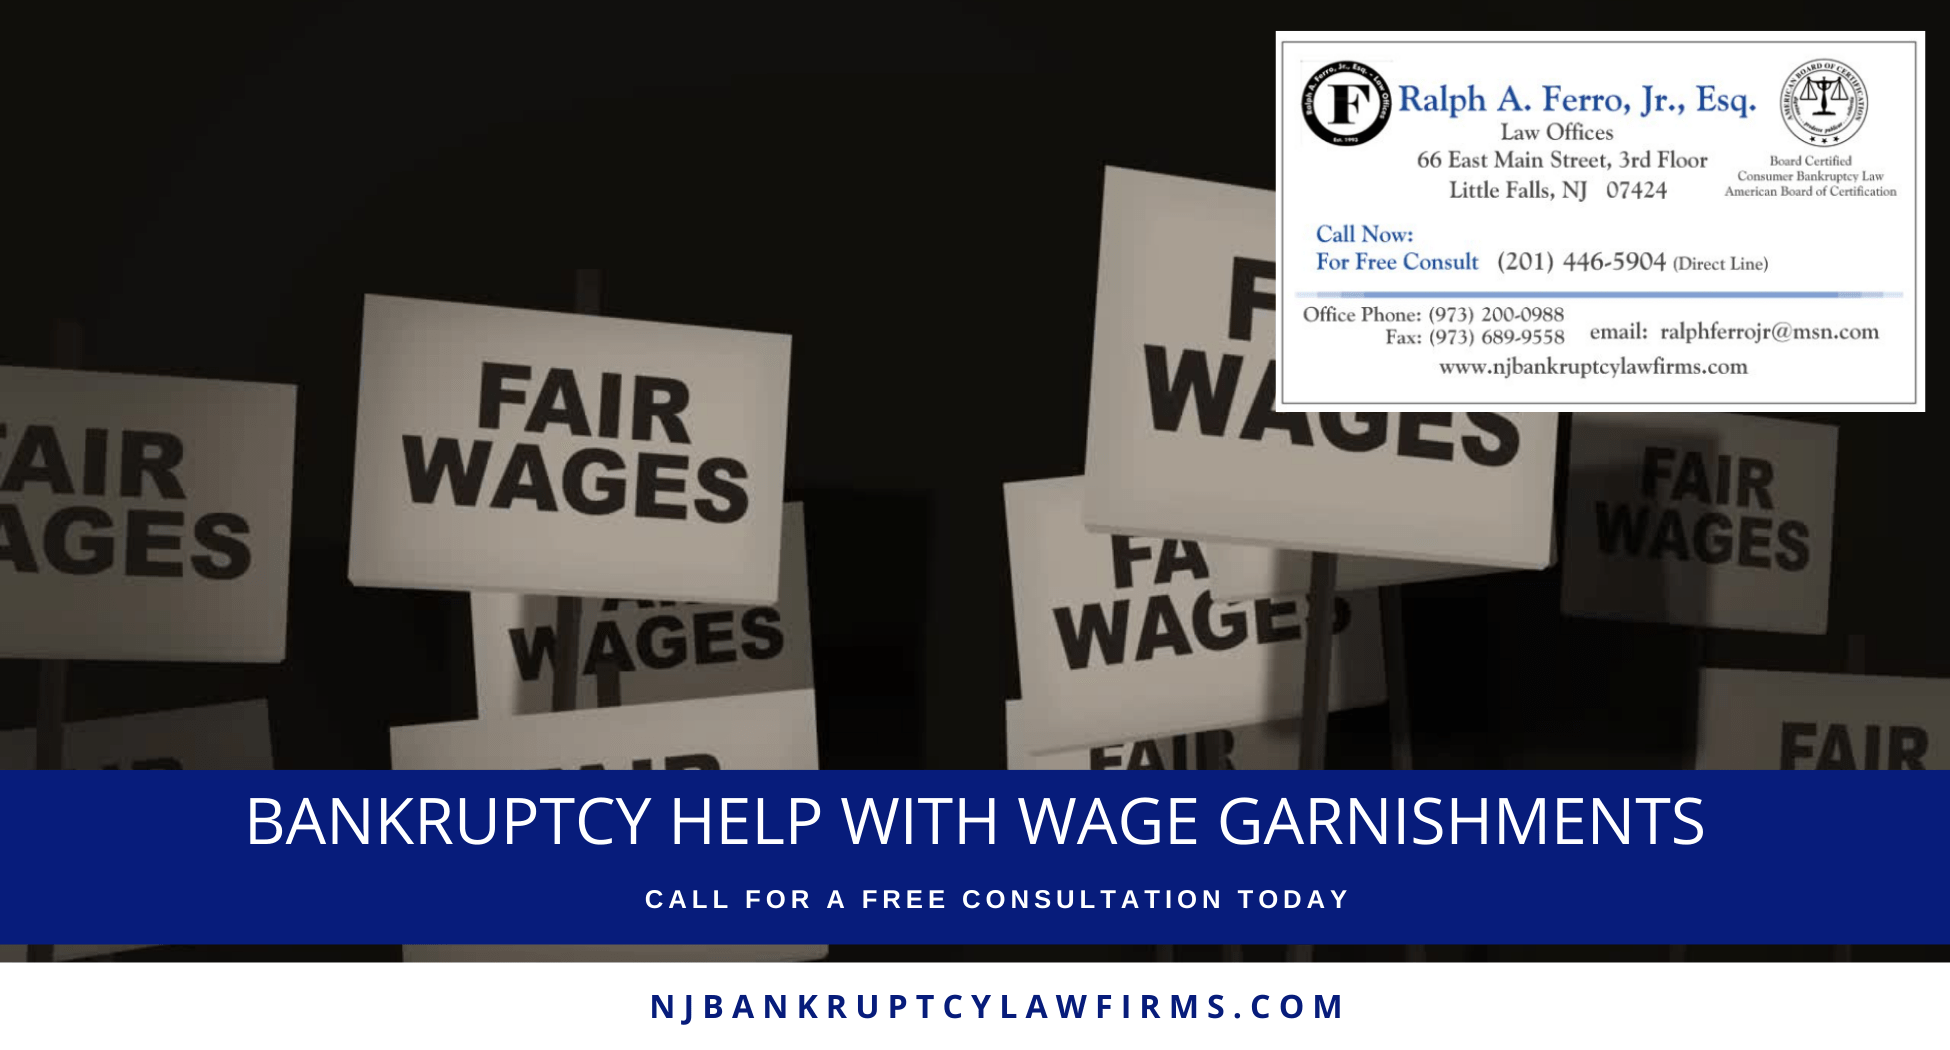 Bankruptcy Help with Wage Garnishments Cover Photo of Picketting